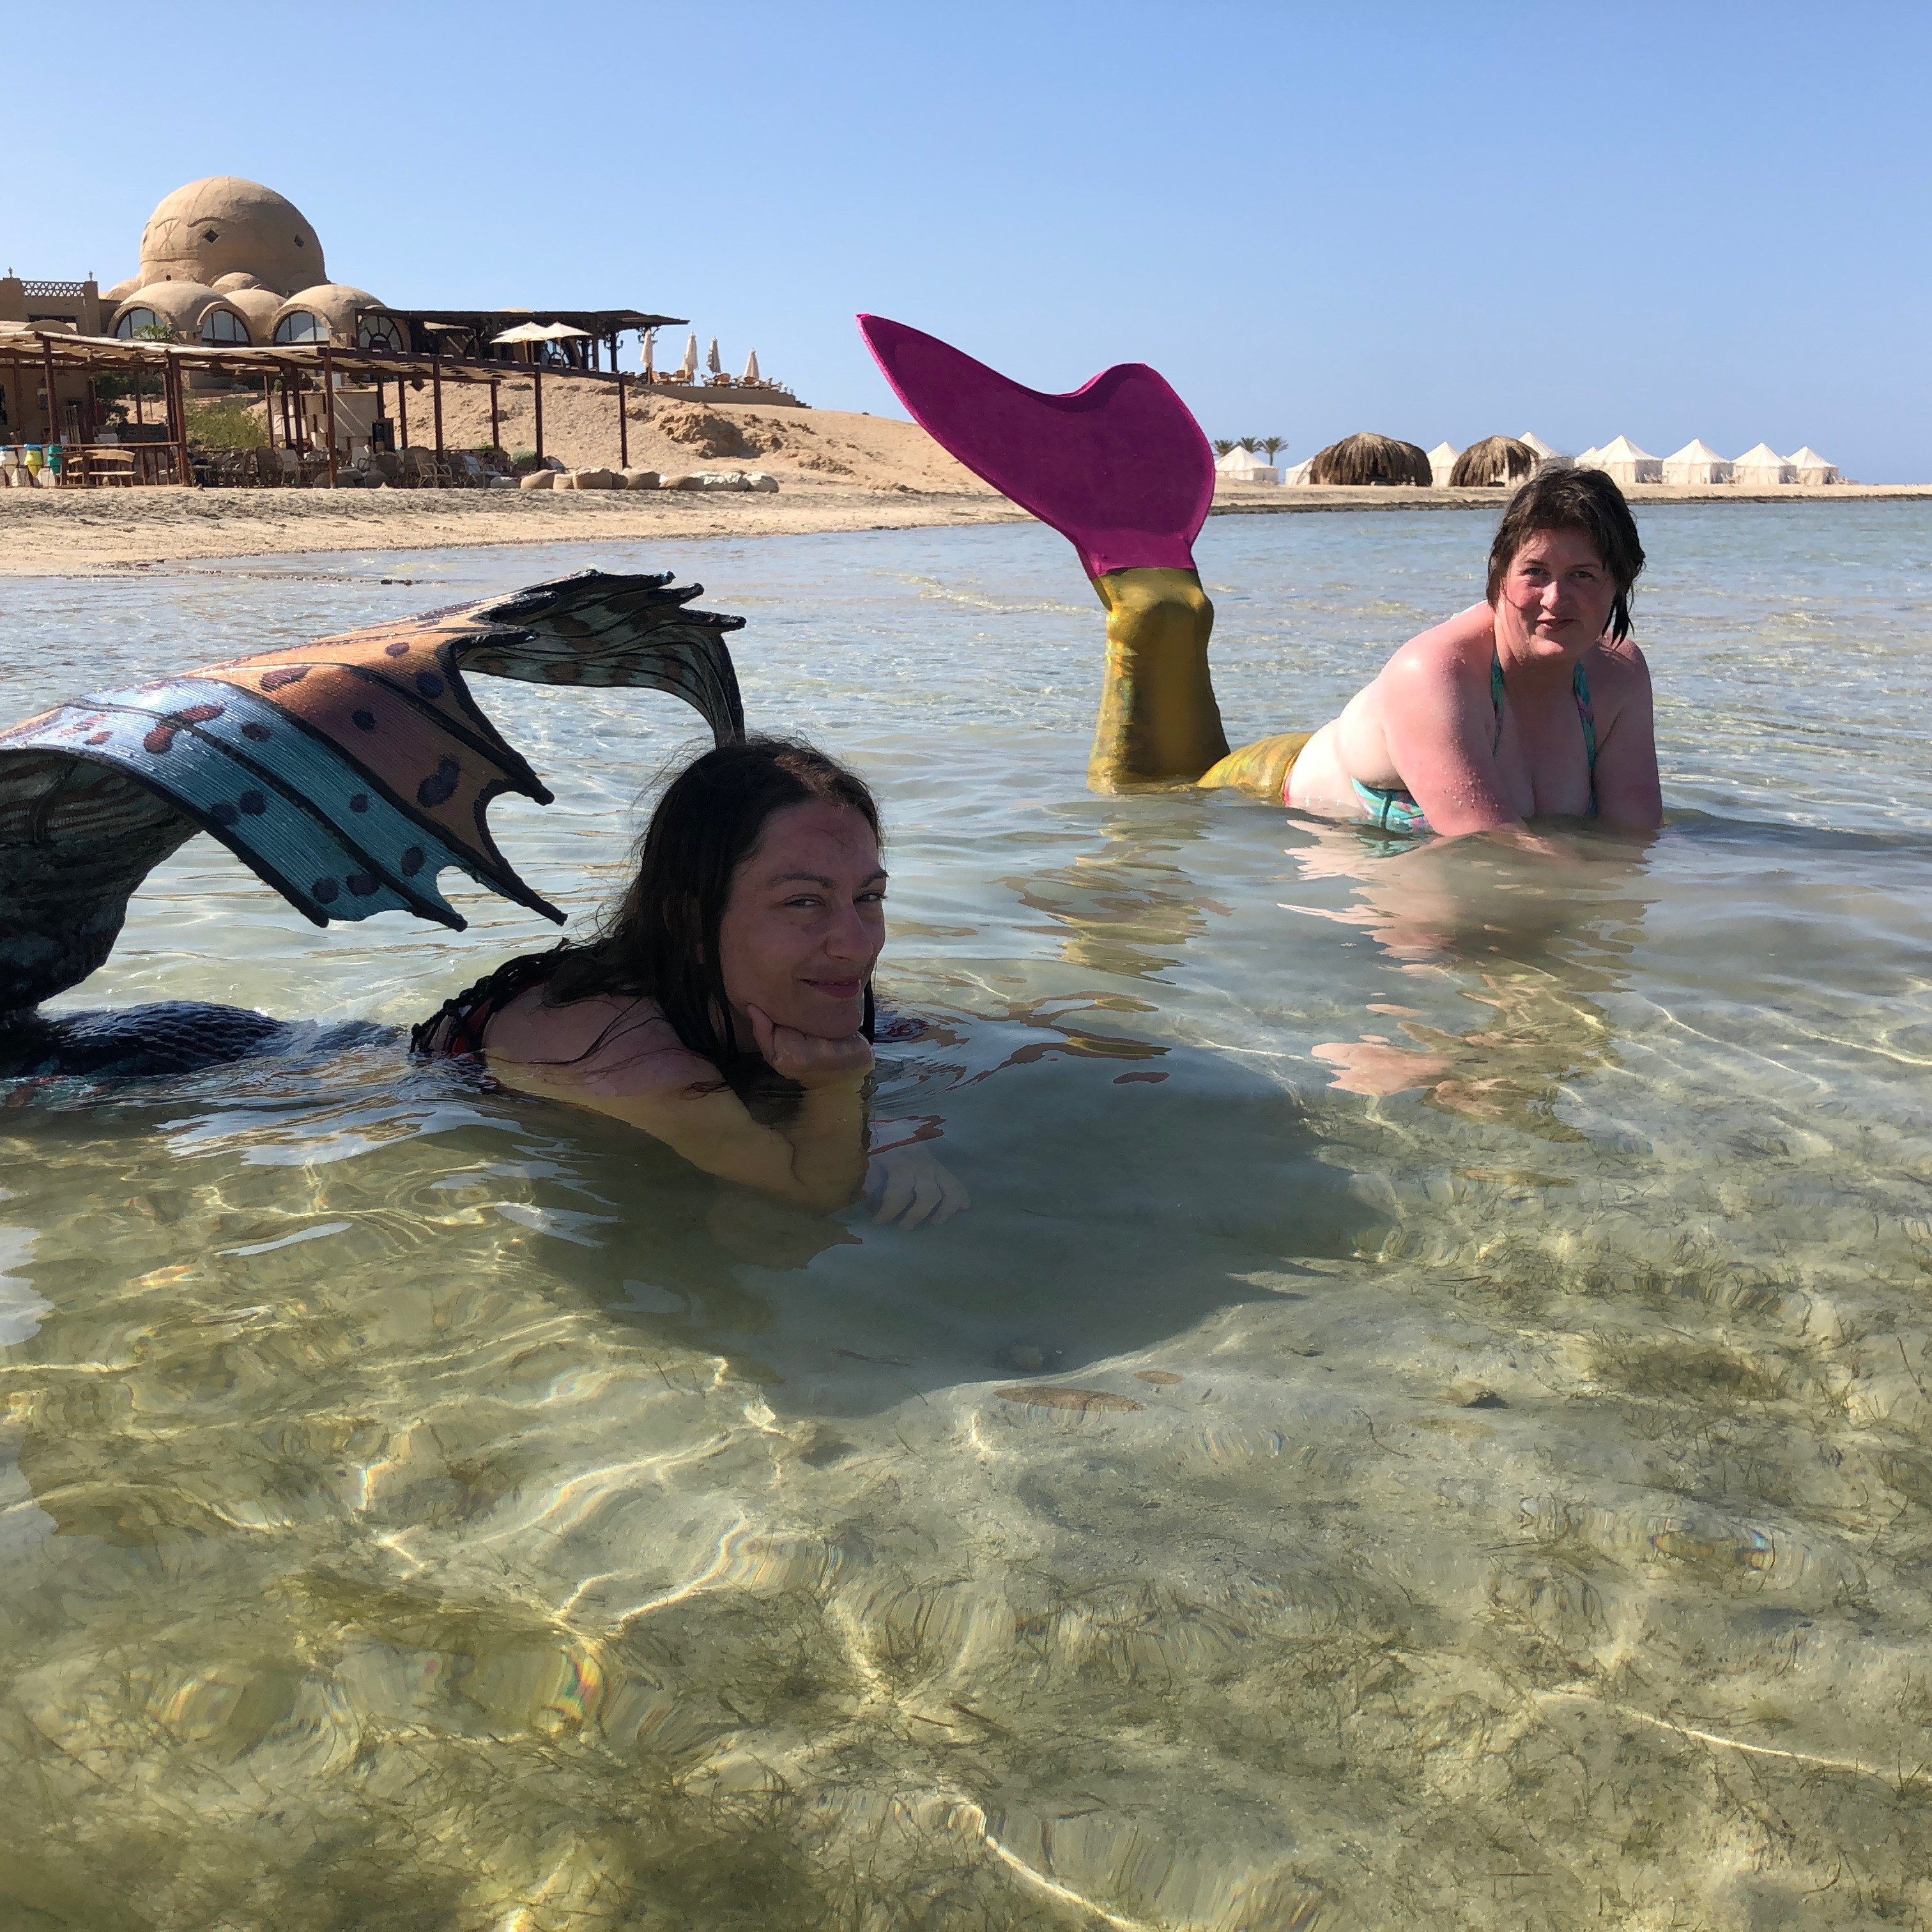 Play and pose in the shallows of the Red Sea in Egypt